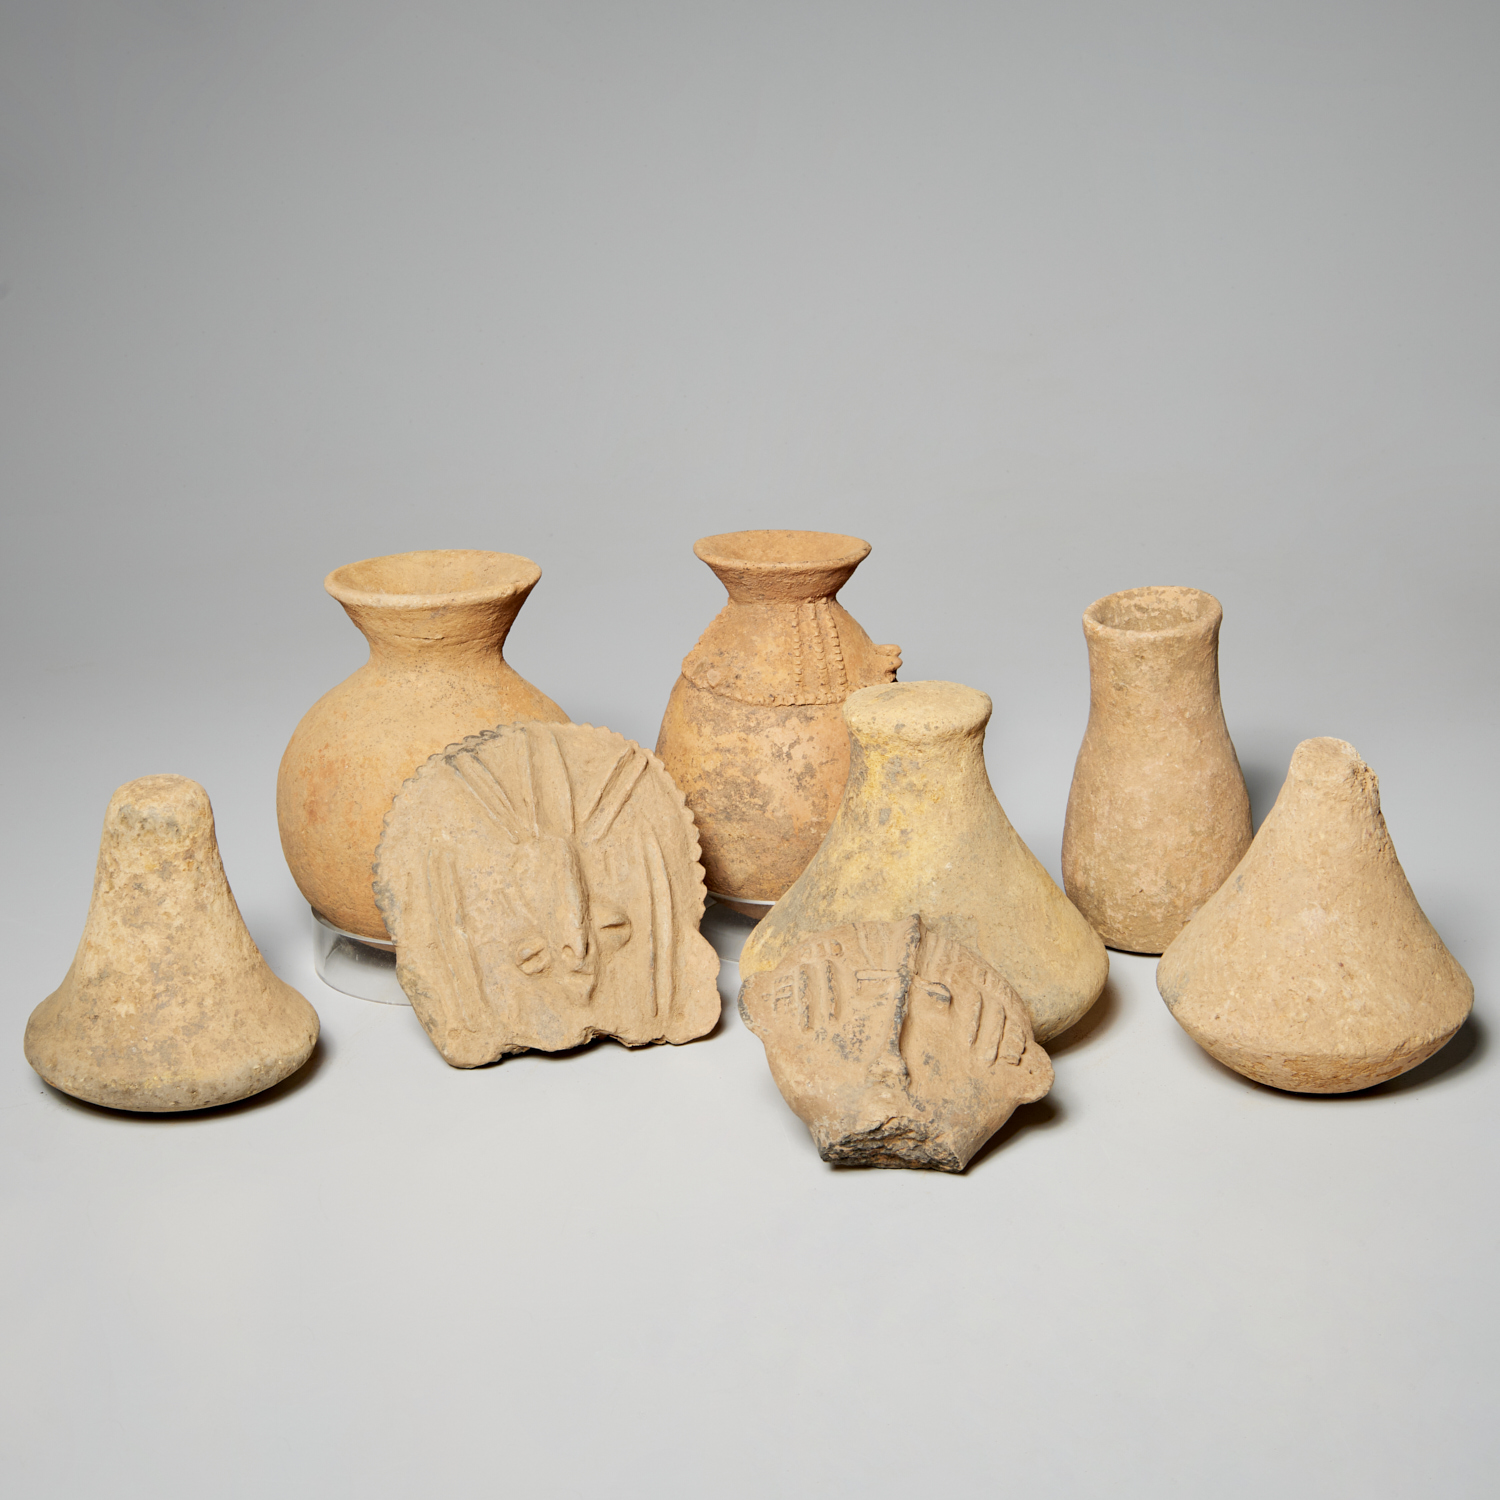 BURA PEOPLES GROUP POTTERY OBJECTS 36107e